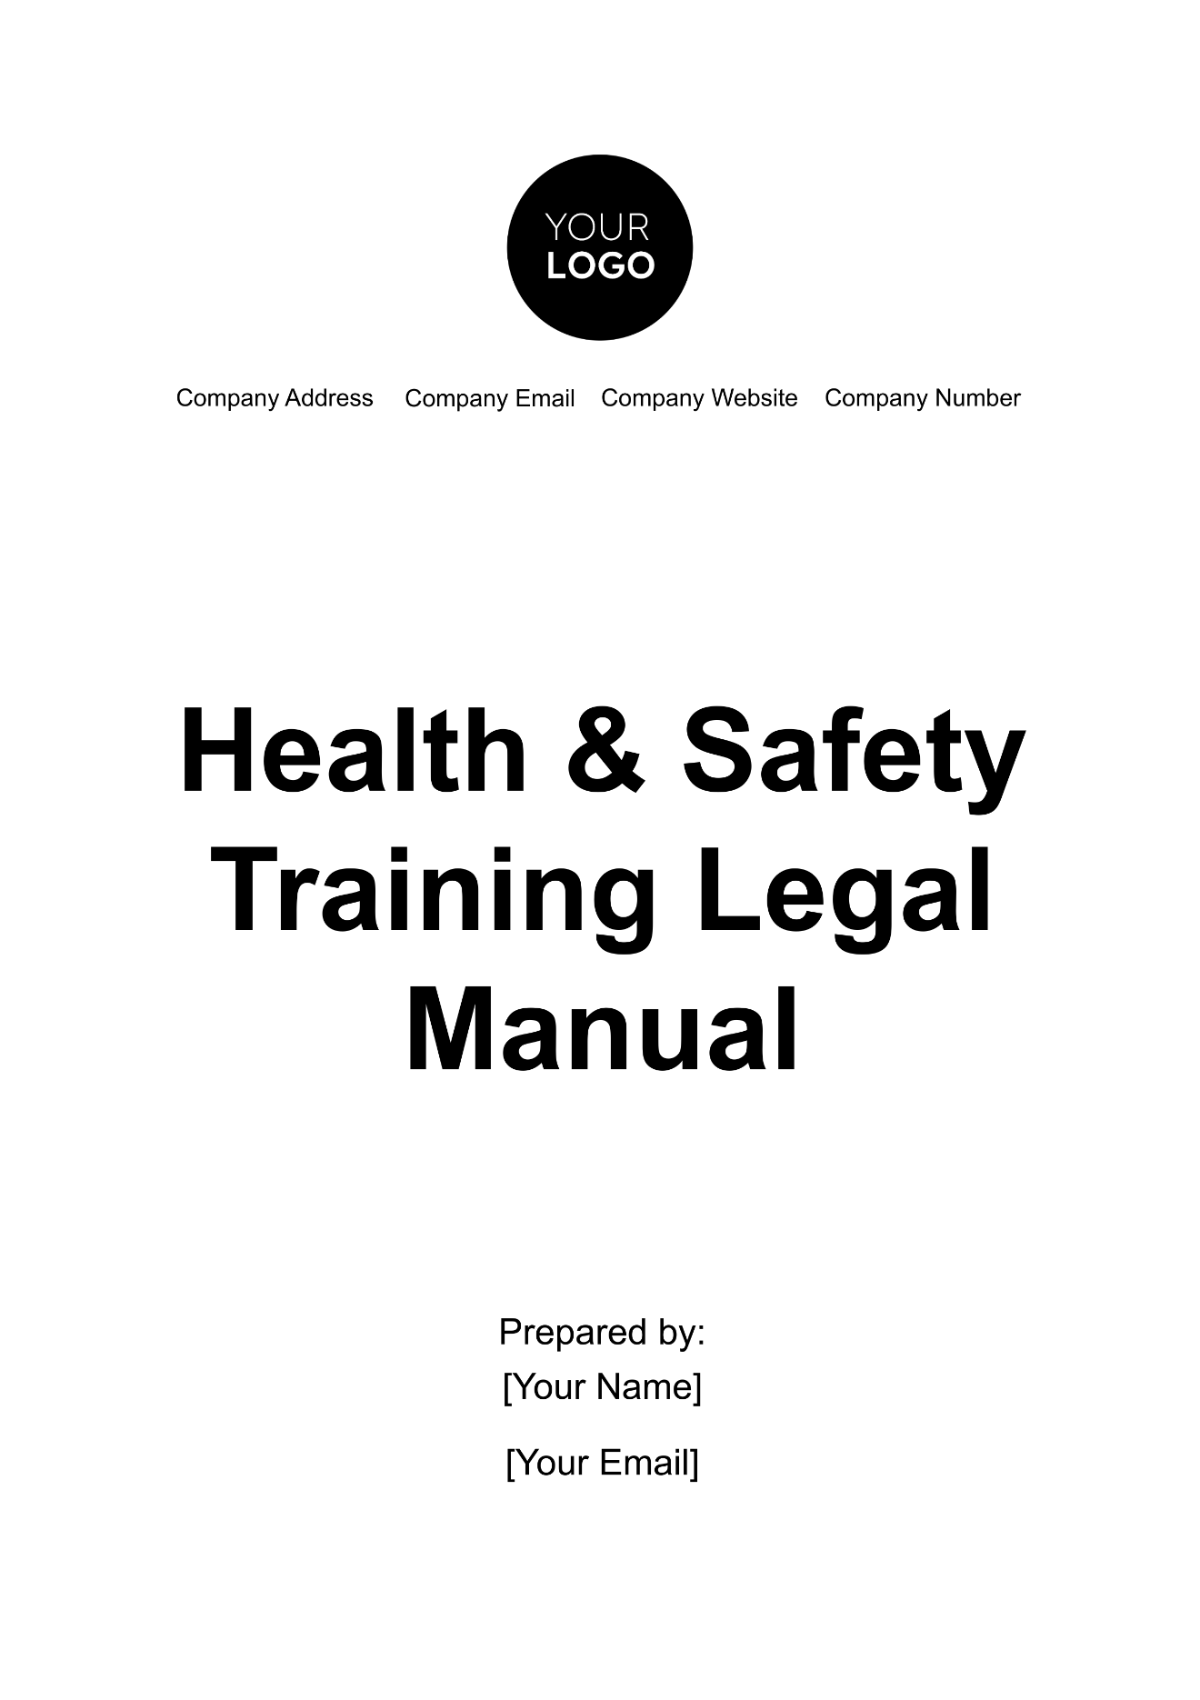 Health & Safety Training Legal Manual Template